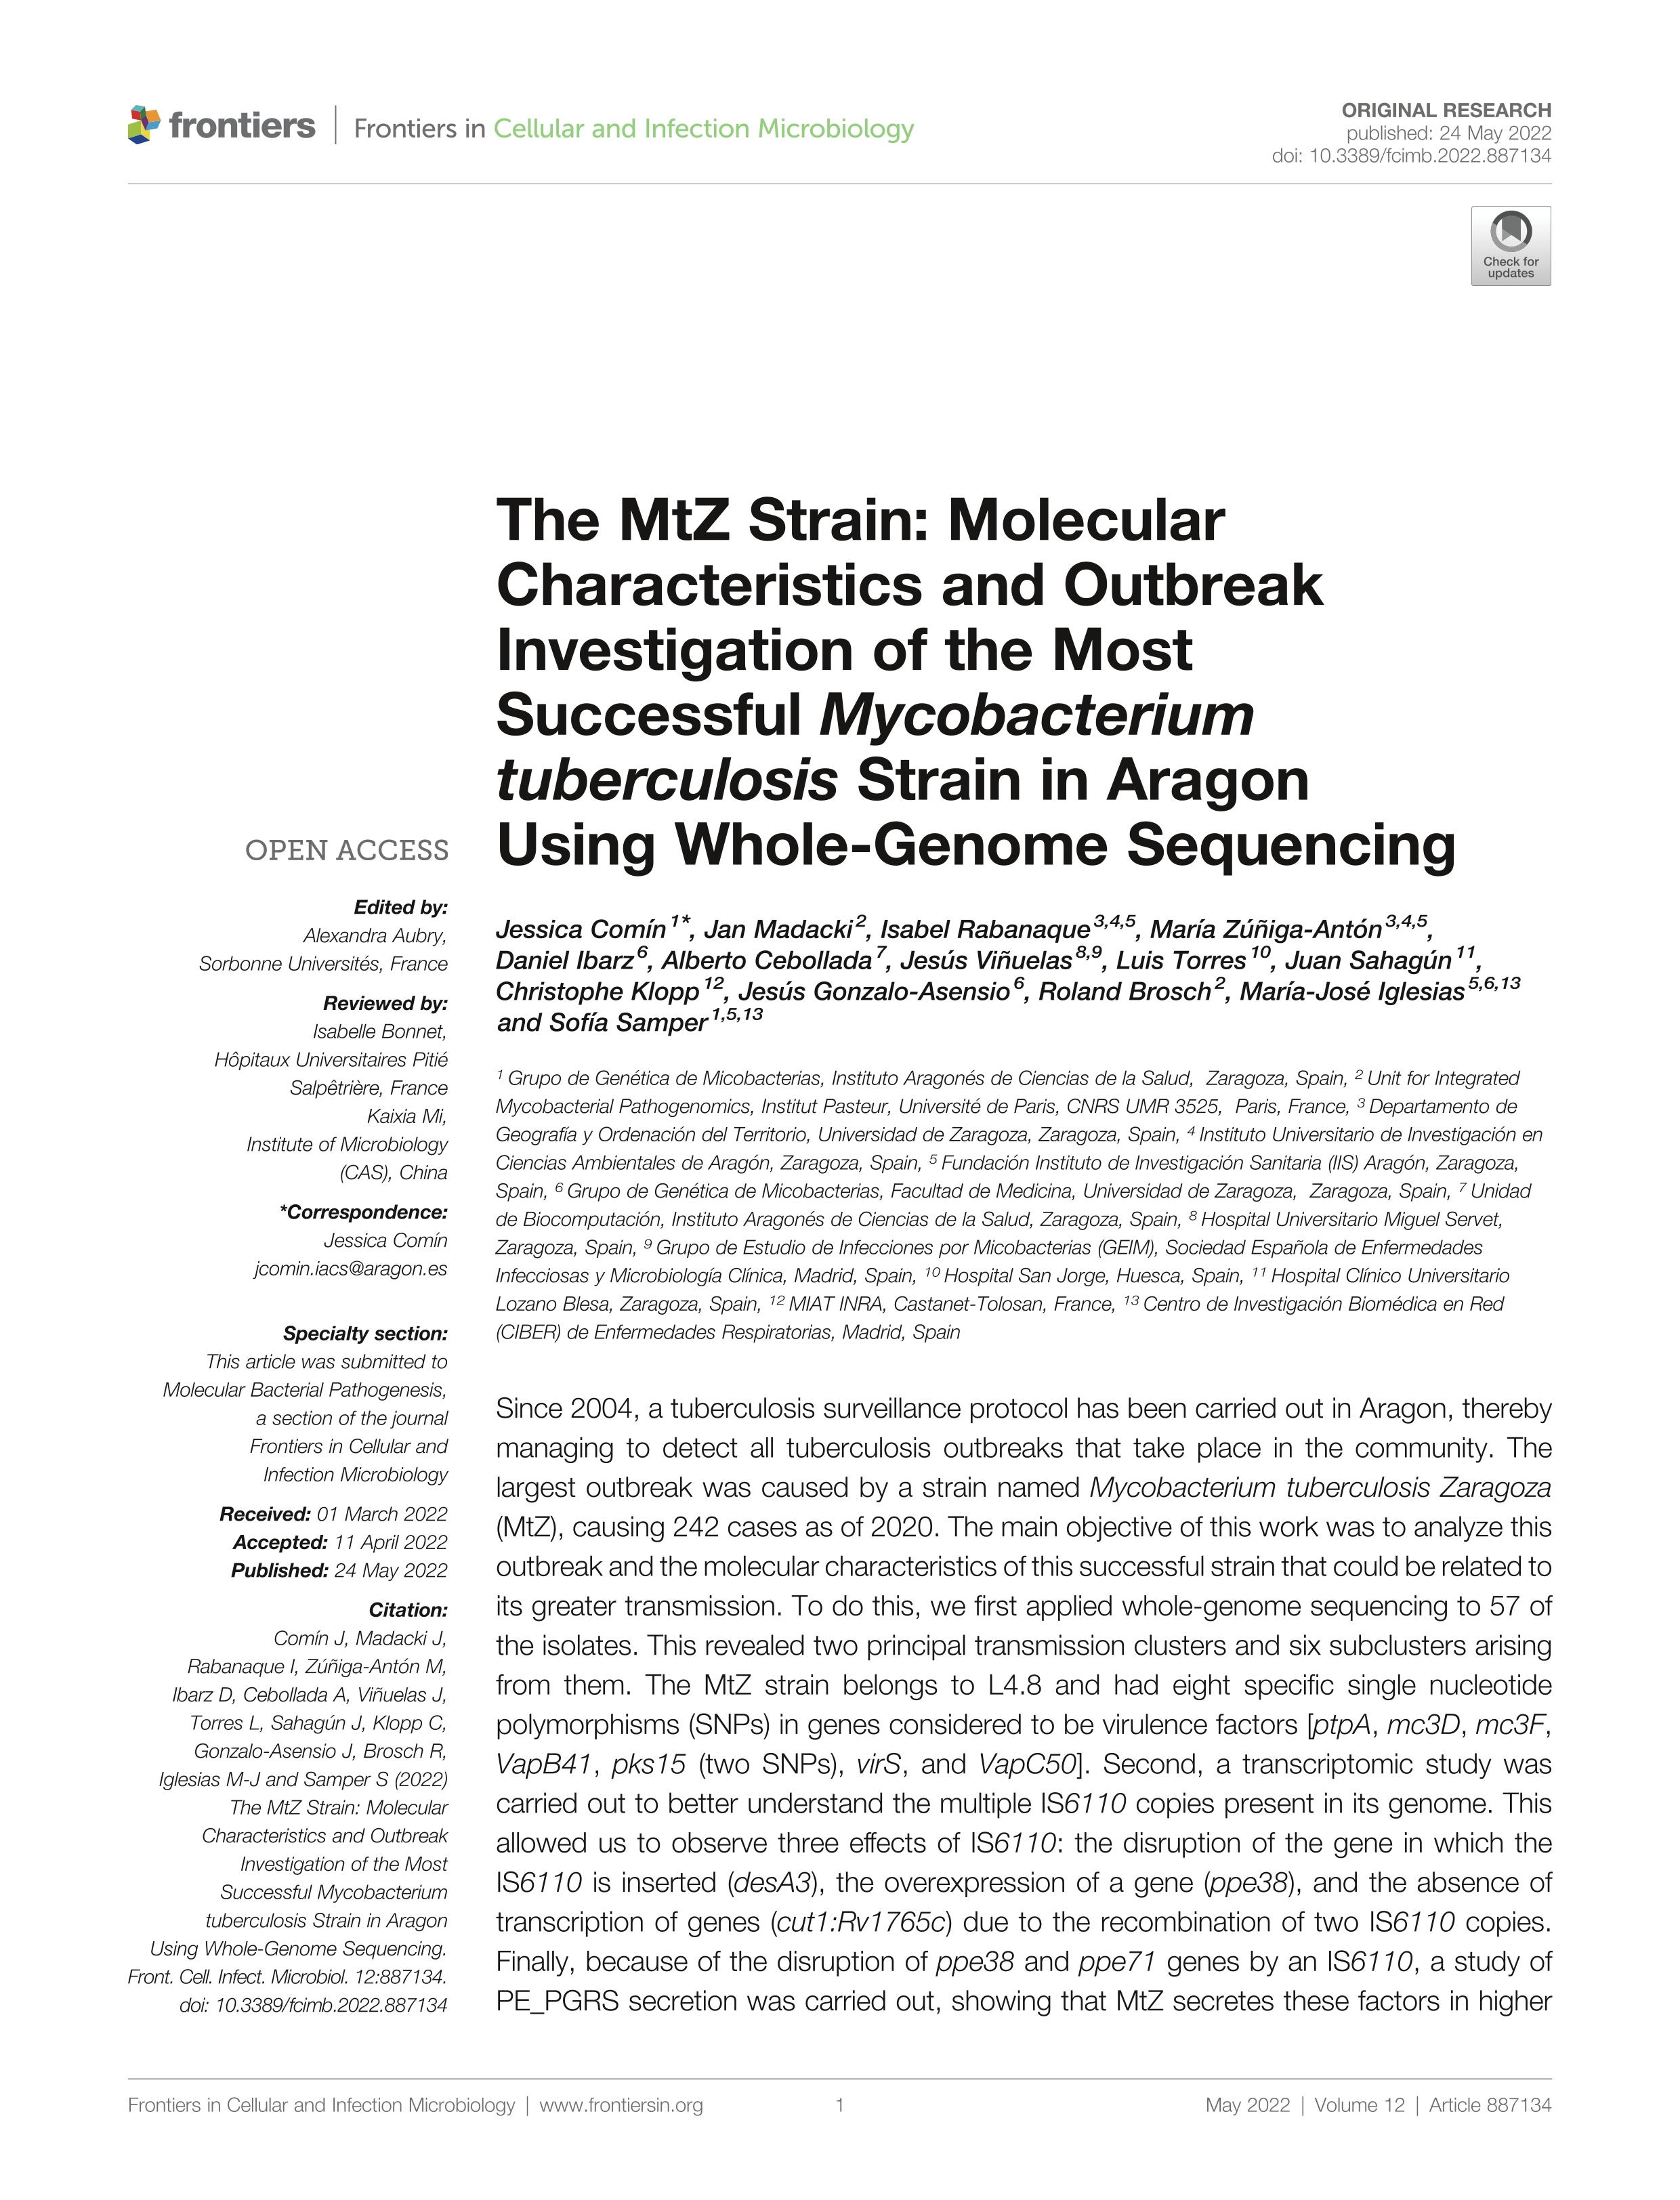 The MtZ Strain: Molecular Characteristics and Outbreak Investigation of the Most Successful Mycobacterium tuberculosis Strain in Aragon Using Whole-Genome Sequencing